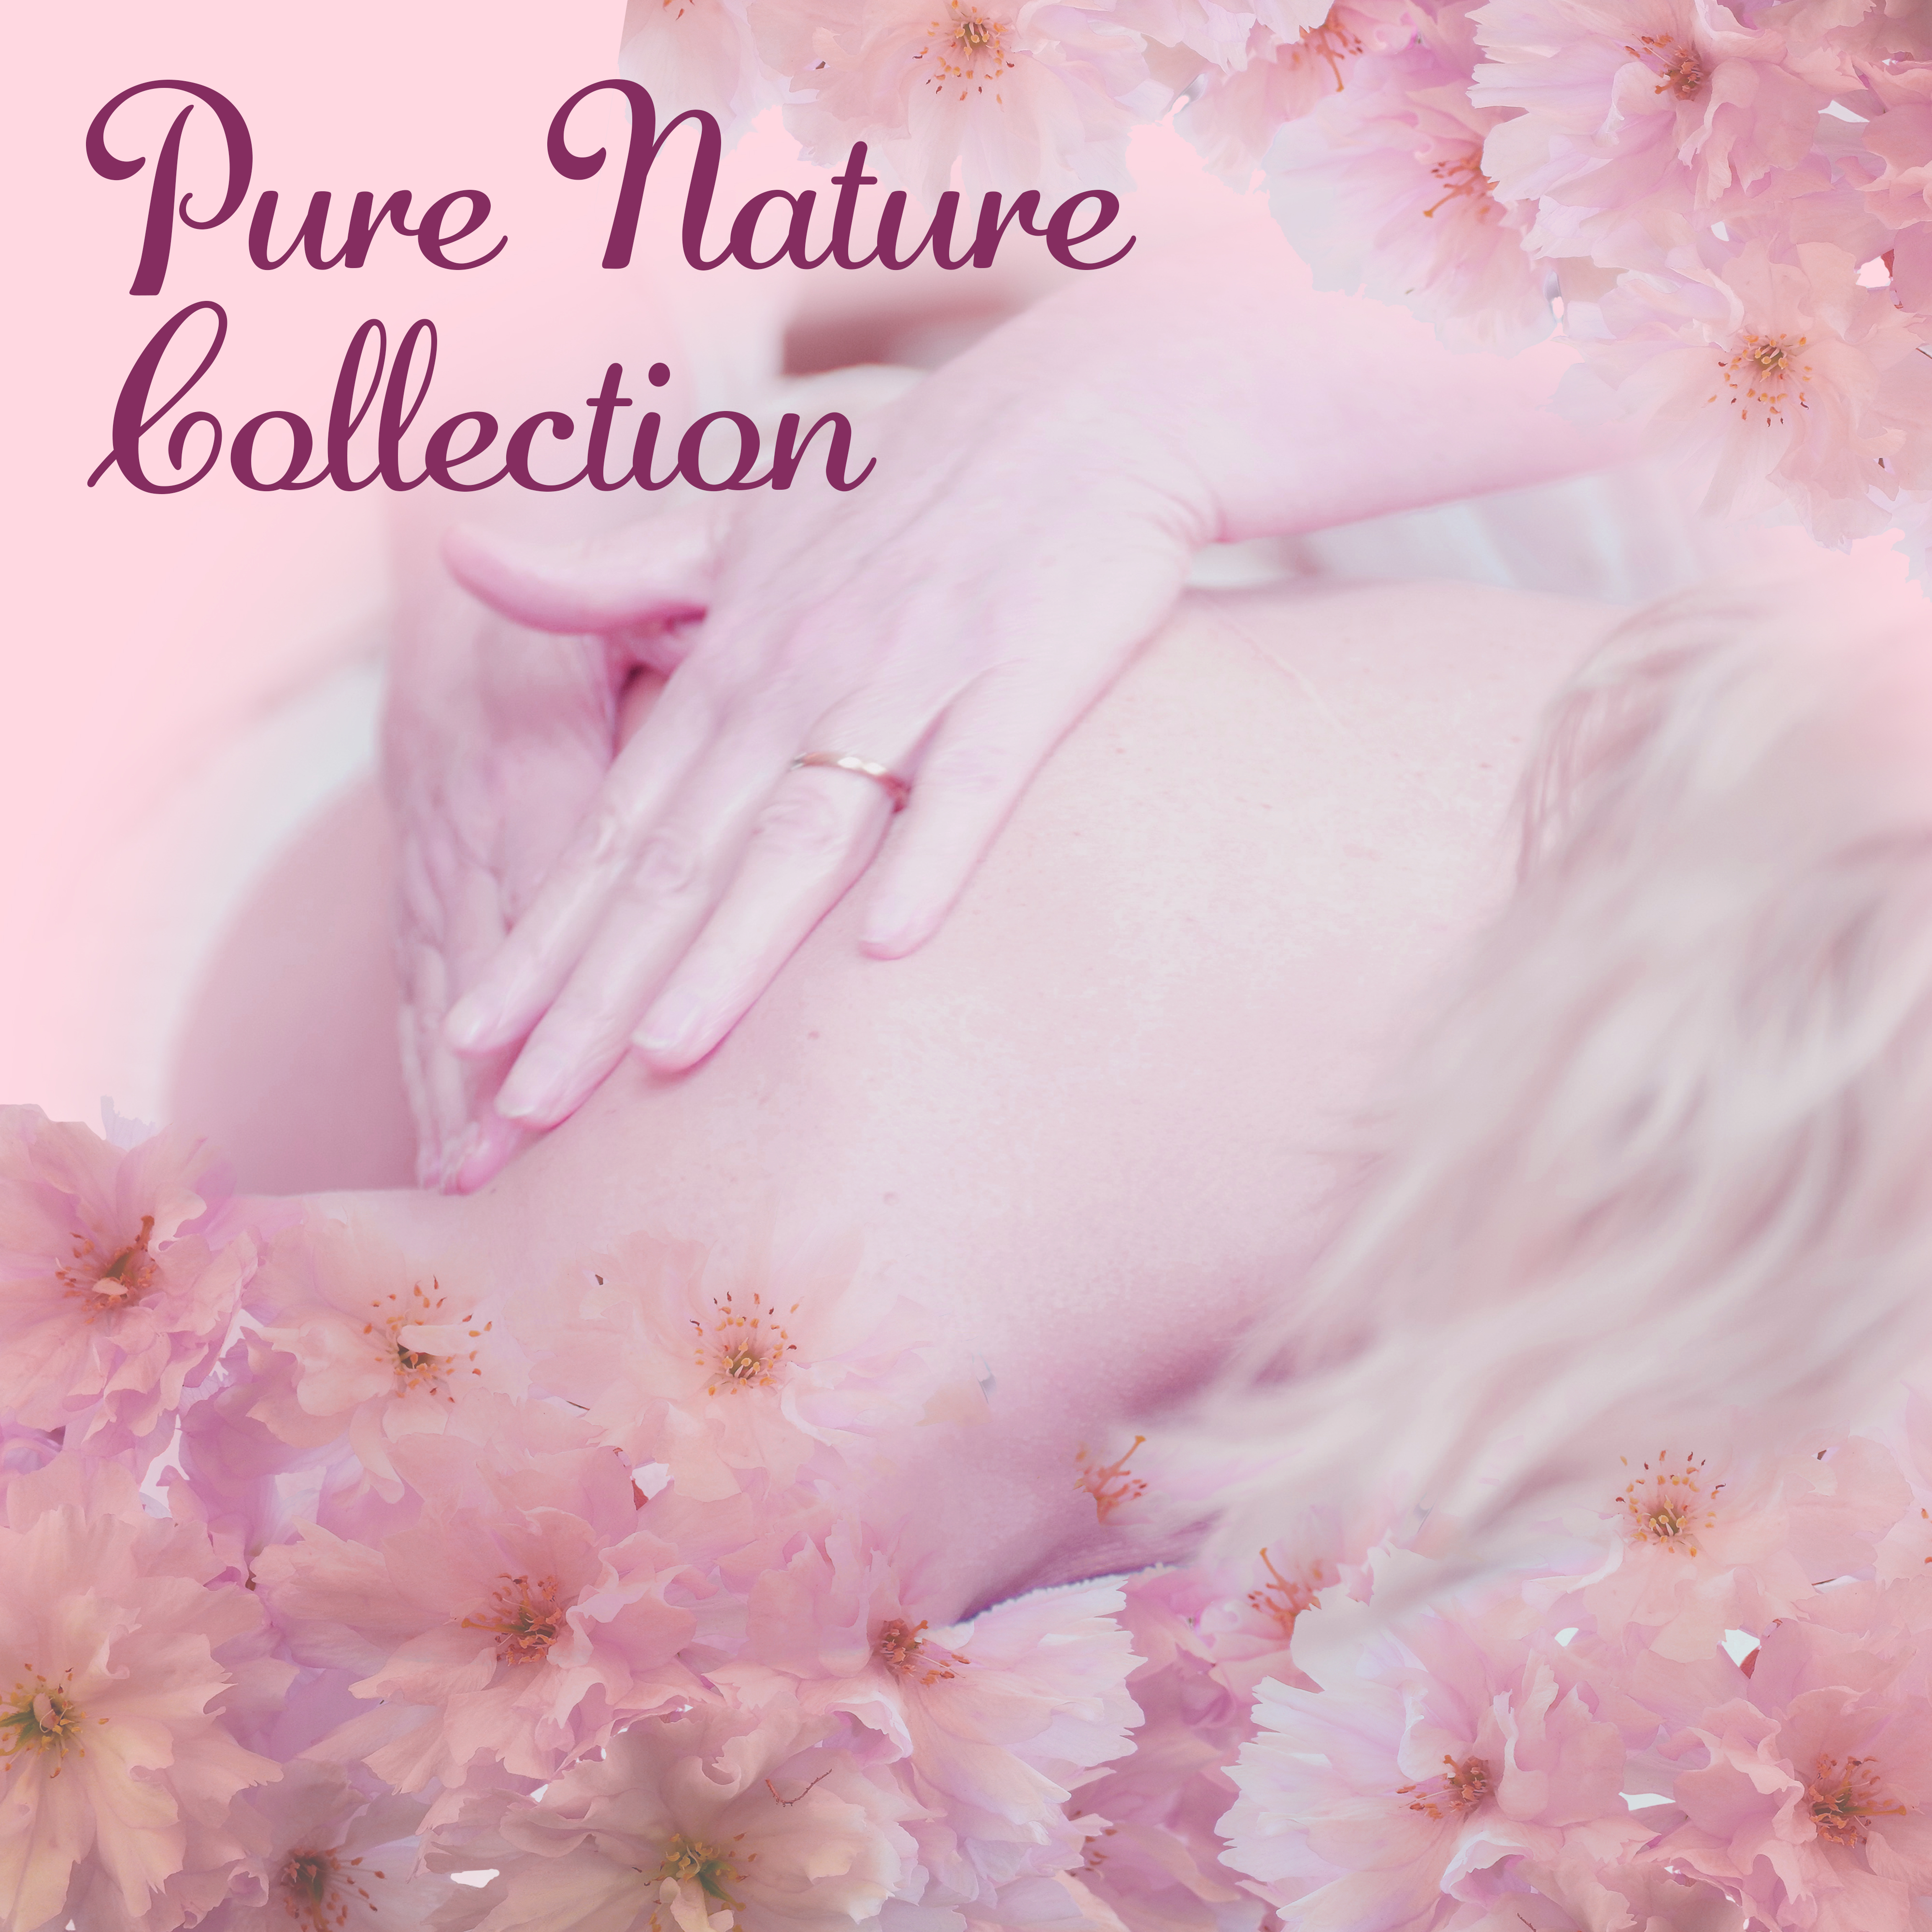 Pure Nature Collection – Instrumental Sounds of Nature, Tantra, Erotic Massage, Relaxation, Sleep